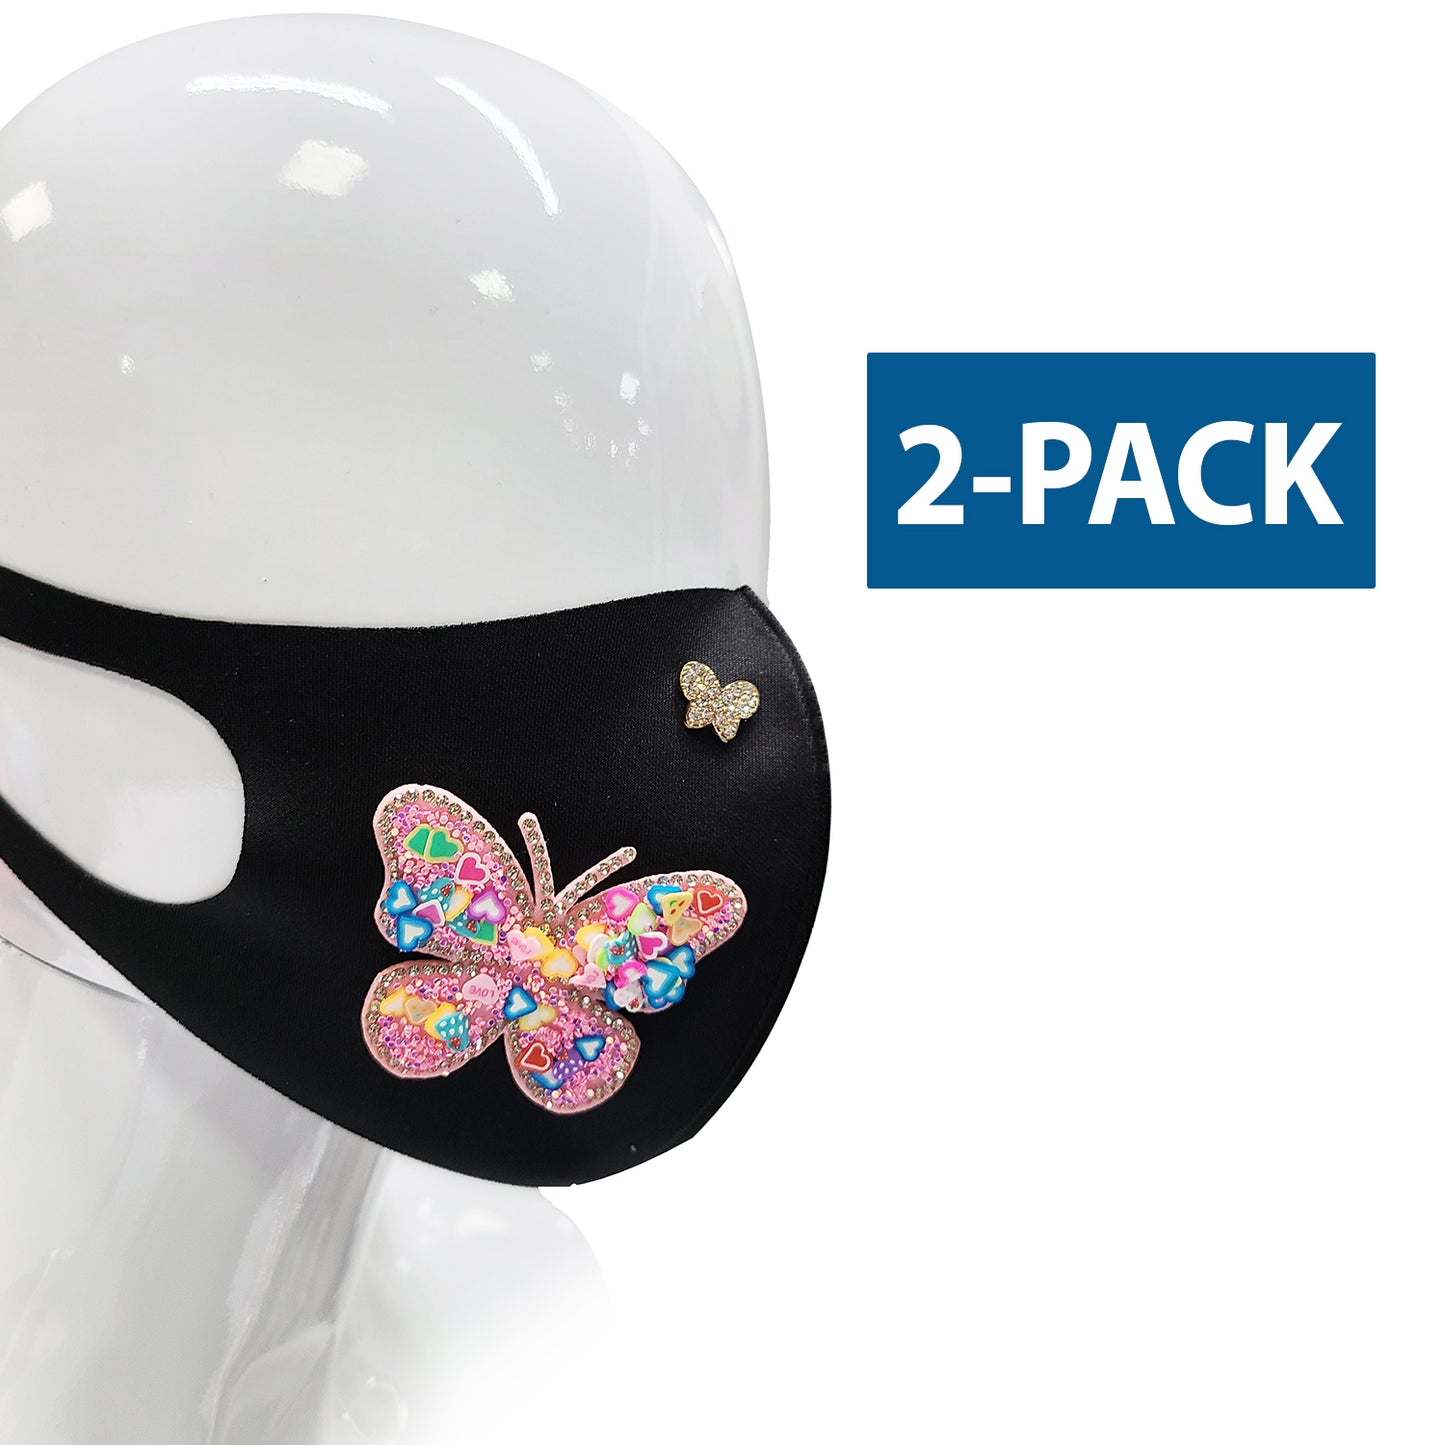 Reusable Fashion Face Mask high Quality Butterfly "2-PACK"